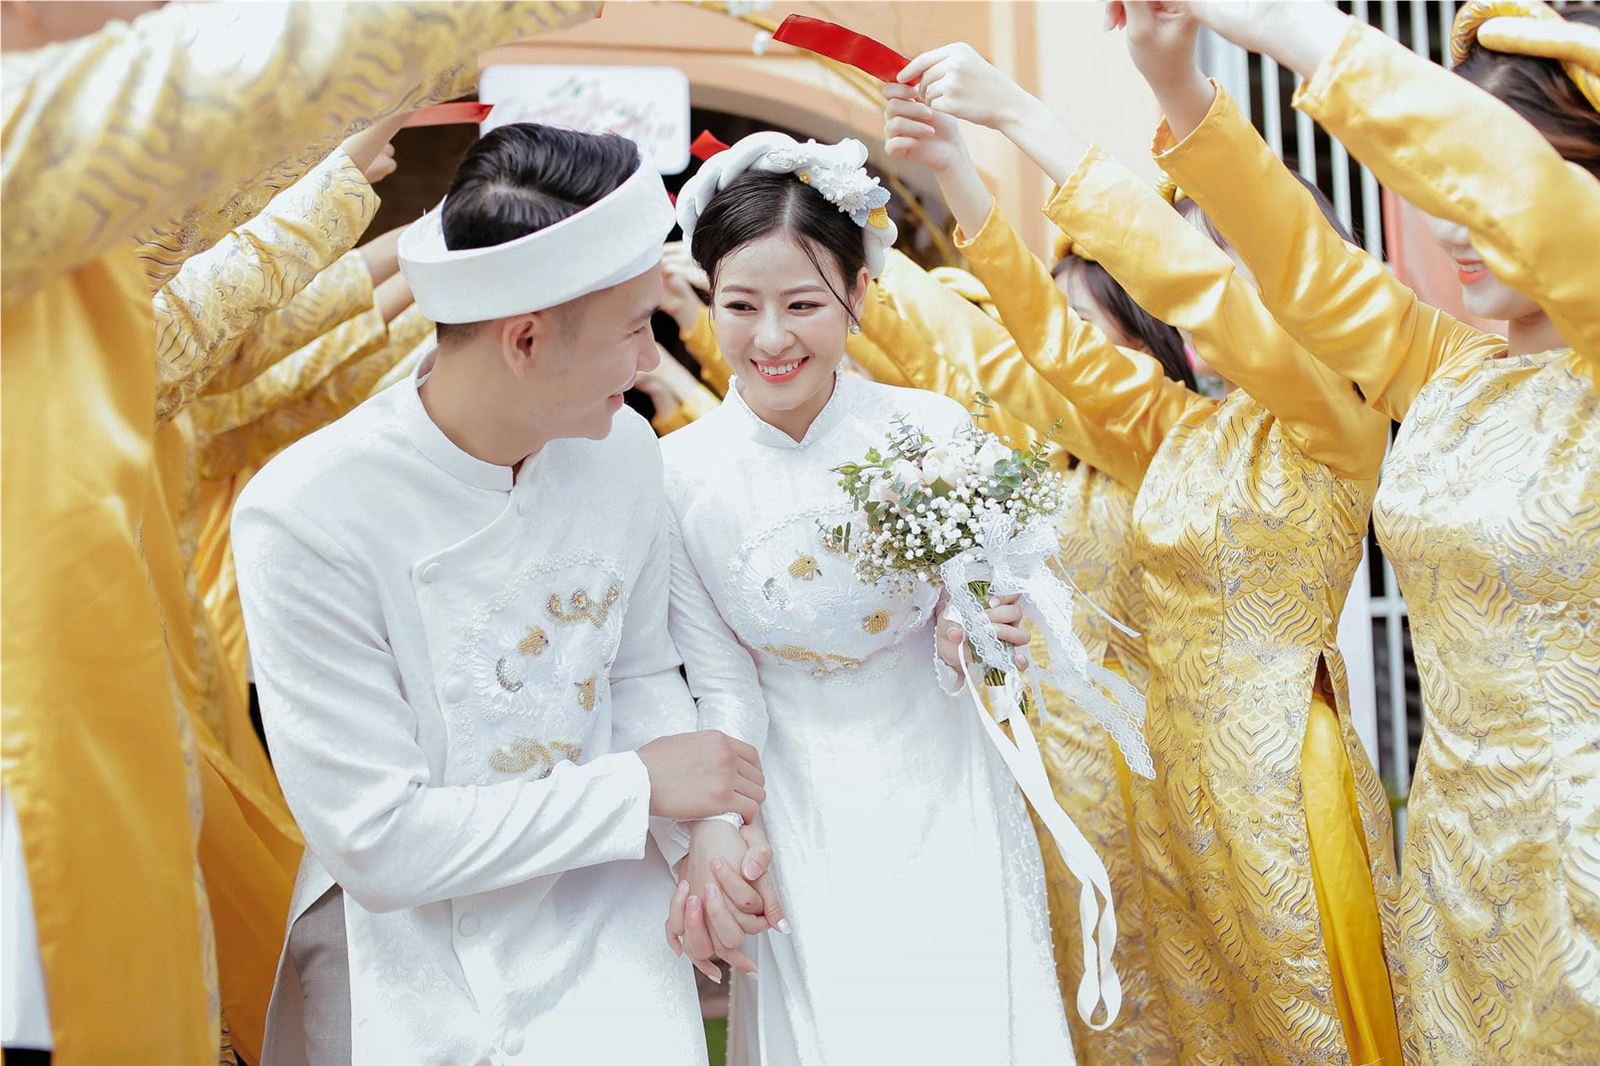 Traditional wedding dresses of Asian countries